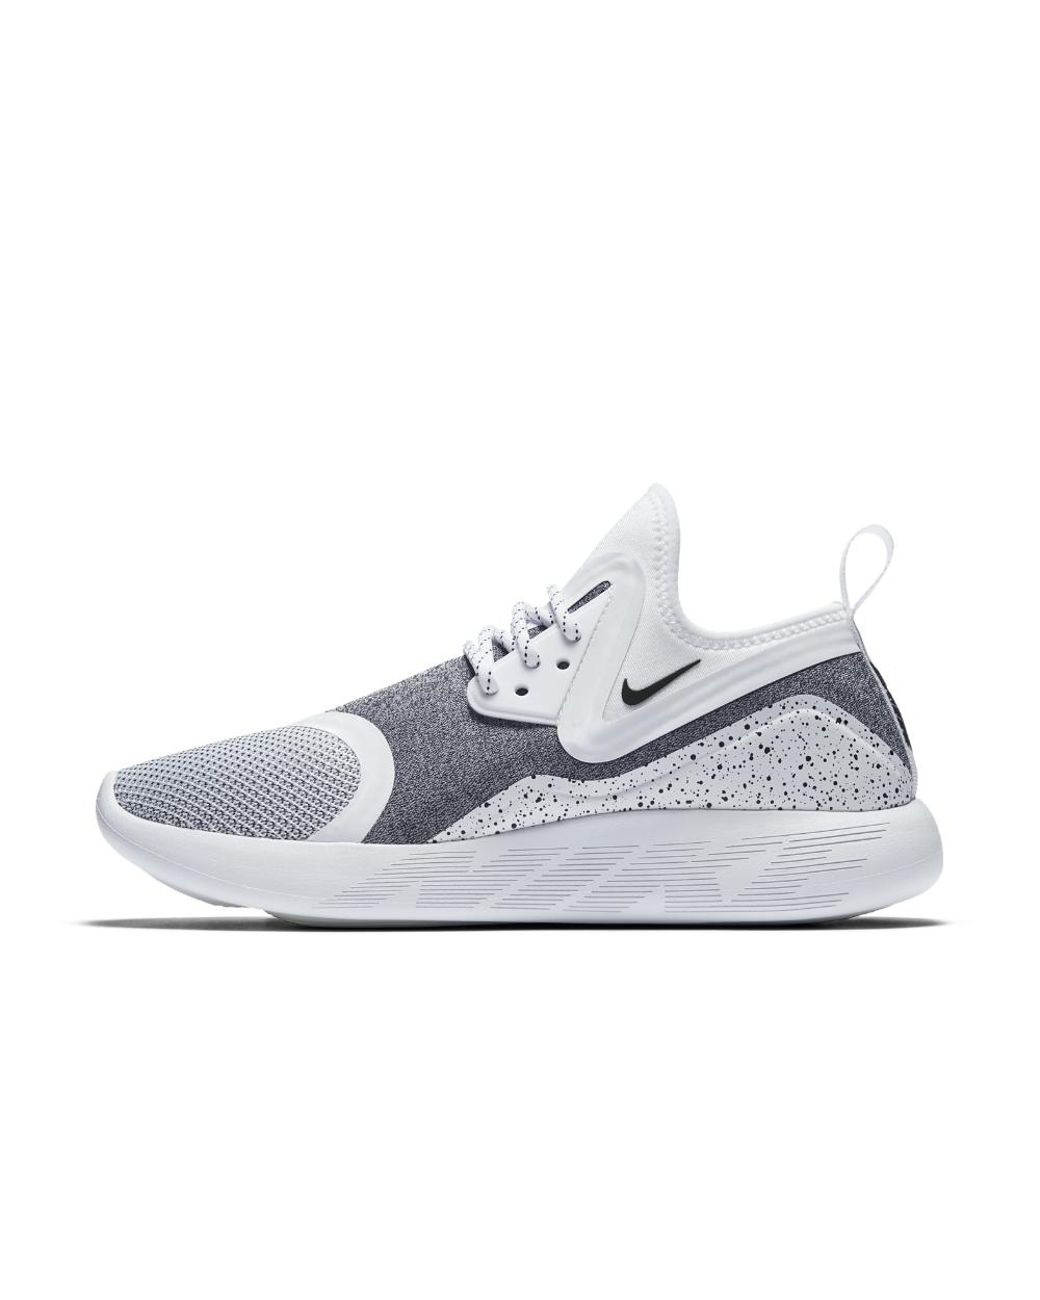 Nike Lunarcharge Essential Women's Shoe in White | Lyst